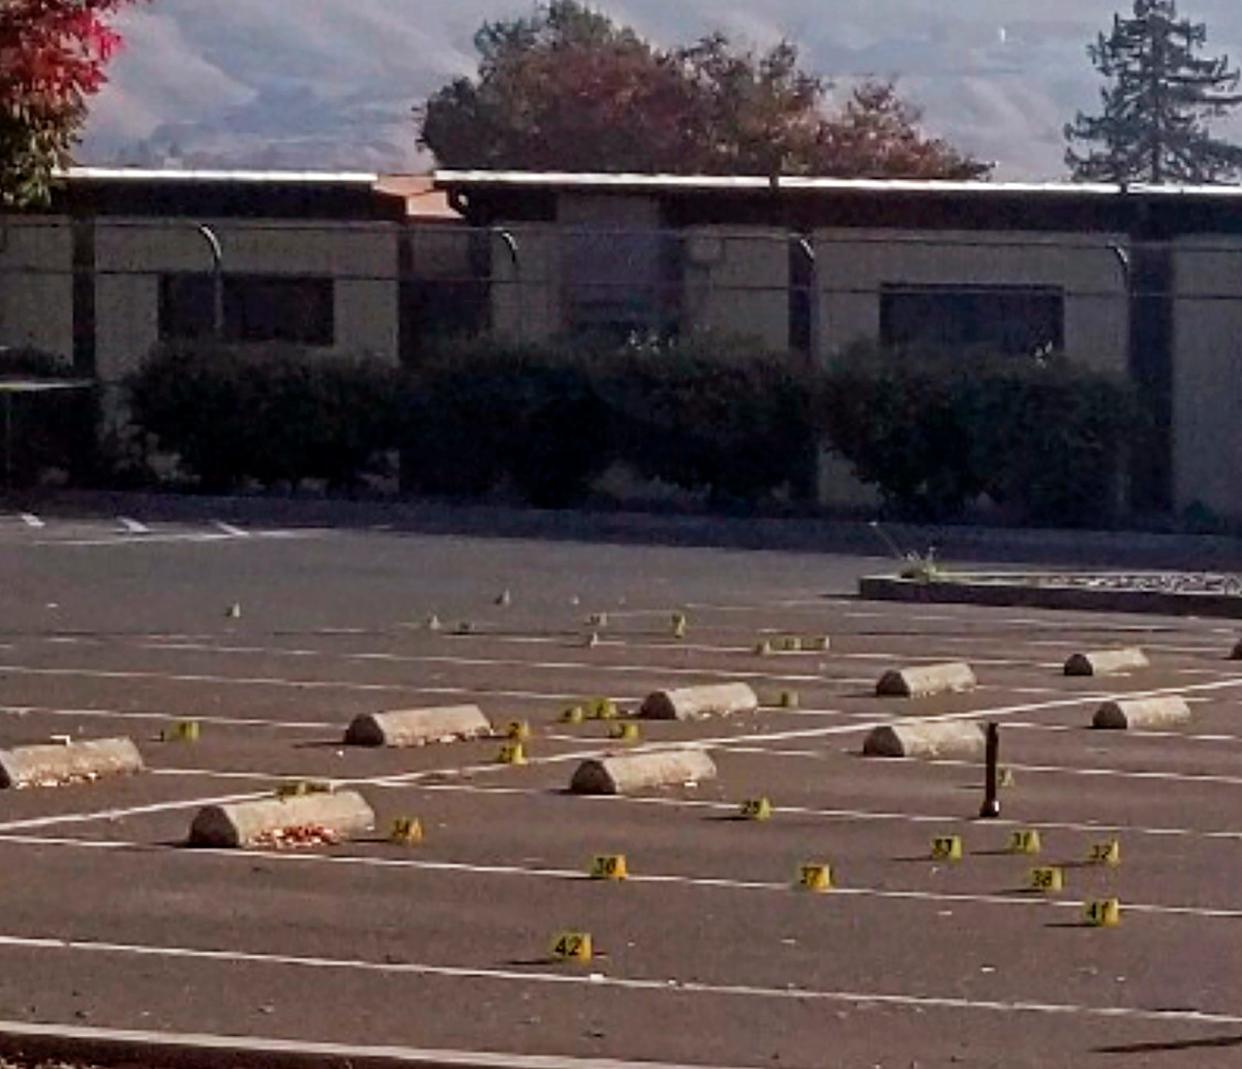 Crime scene evidence markers dot the parking lot of the Searles Elementary School in Union City, Calif.